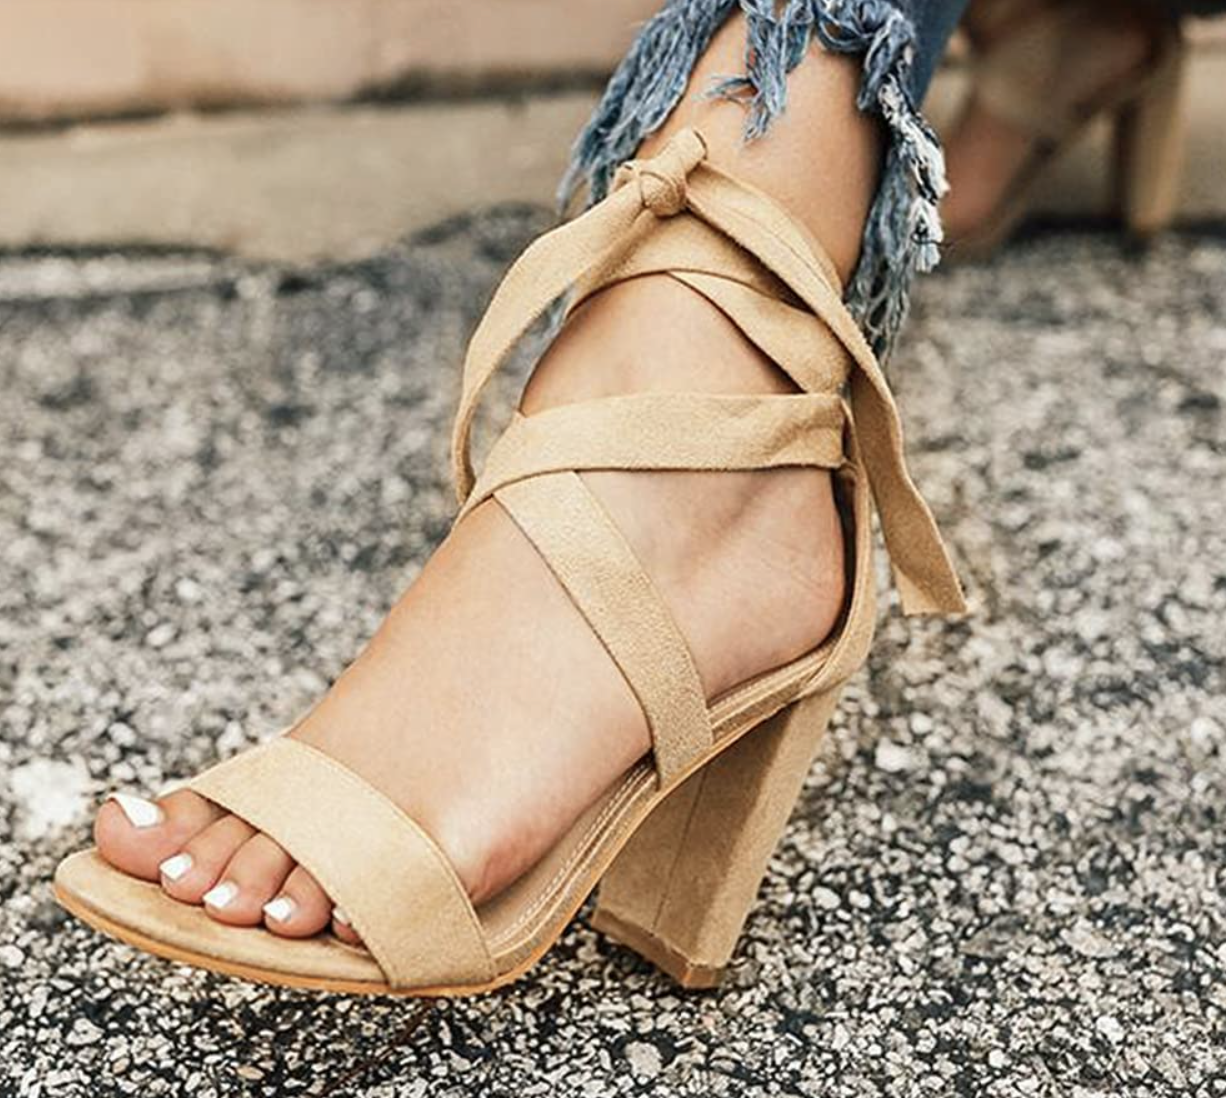 29 Summer-Friendly Shoes That'll Keep Your Feet Happy